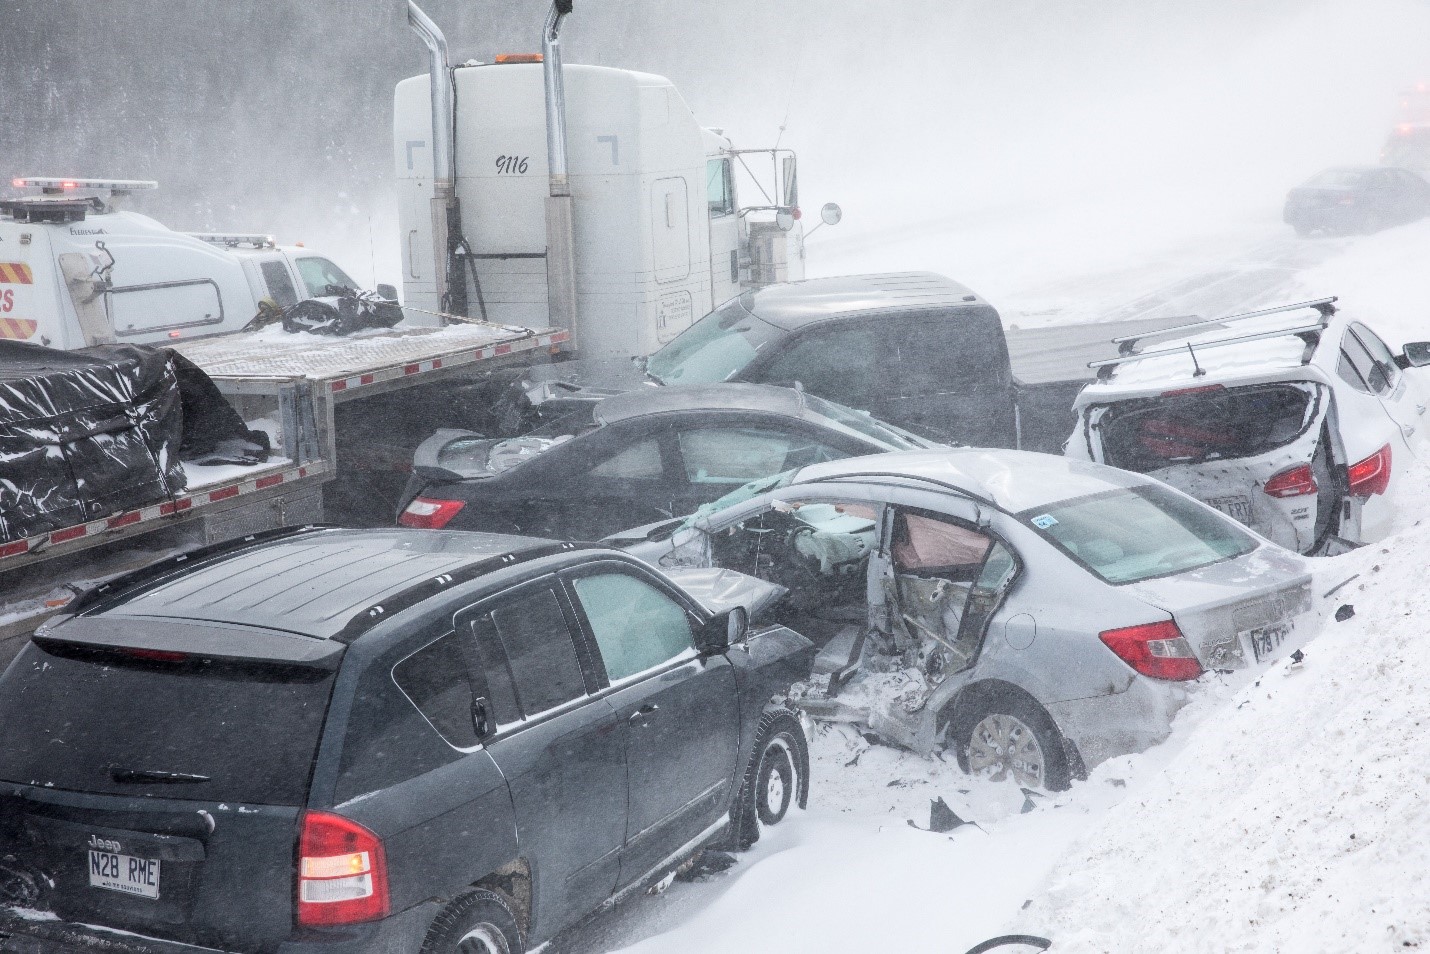 Winter Semi-Truck Accident Pile-Up